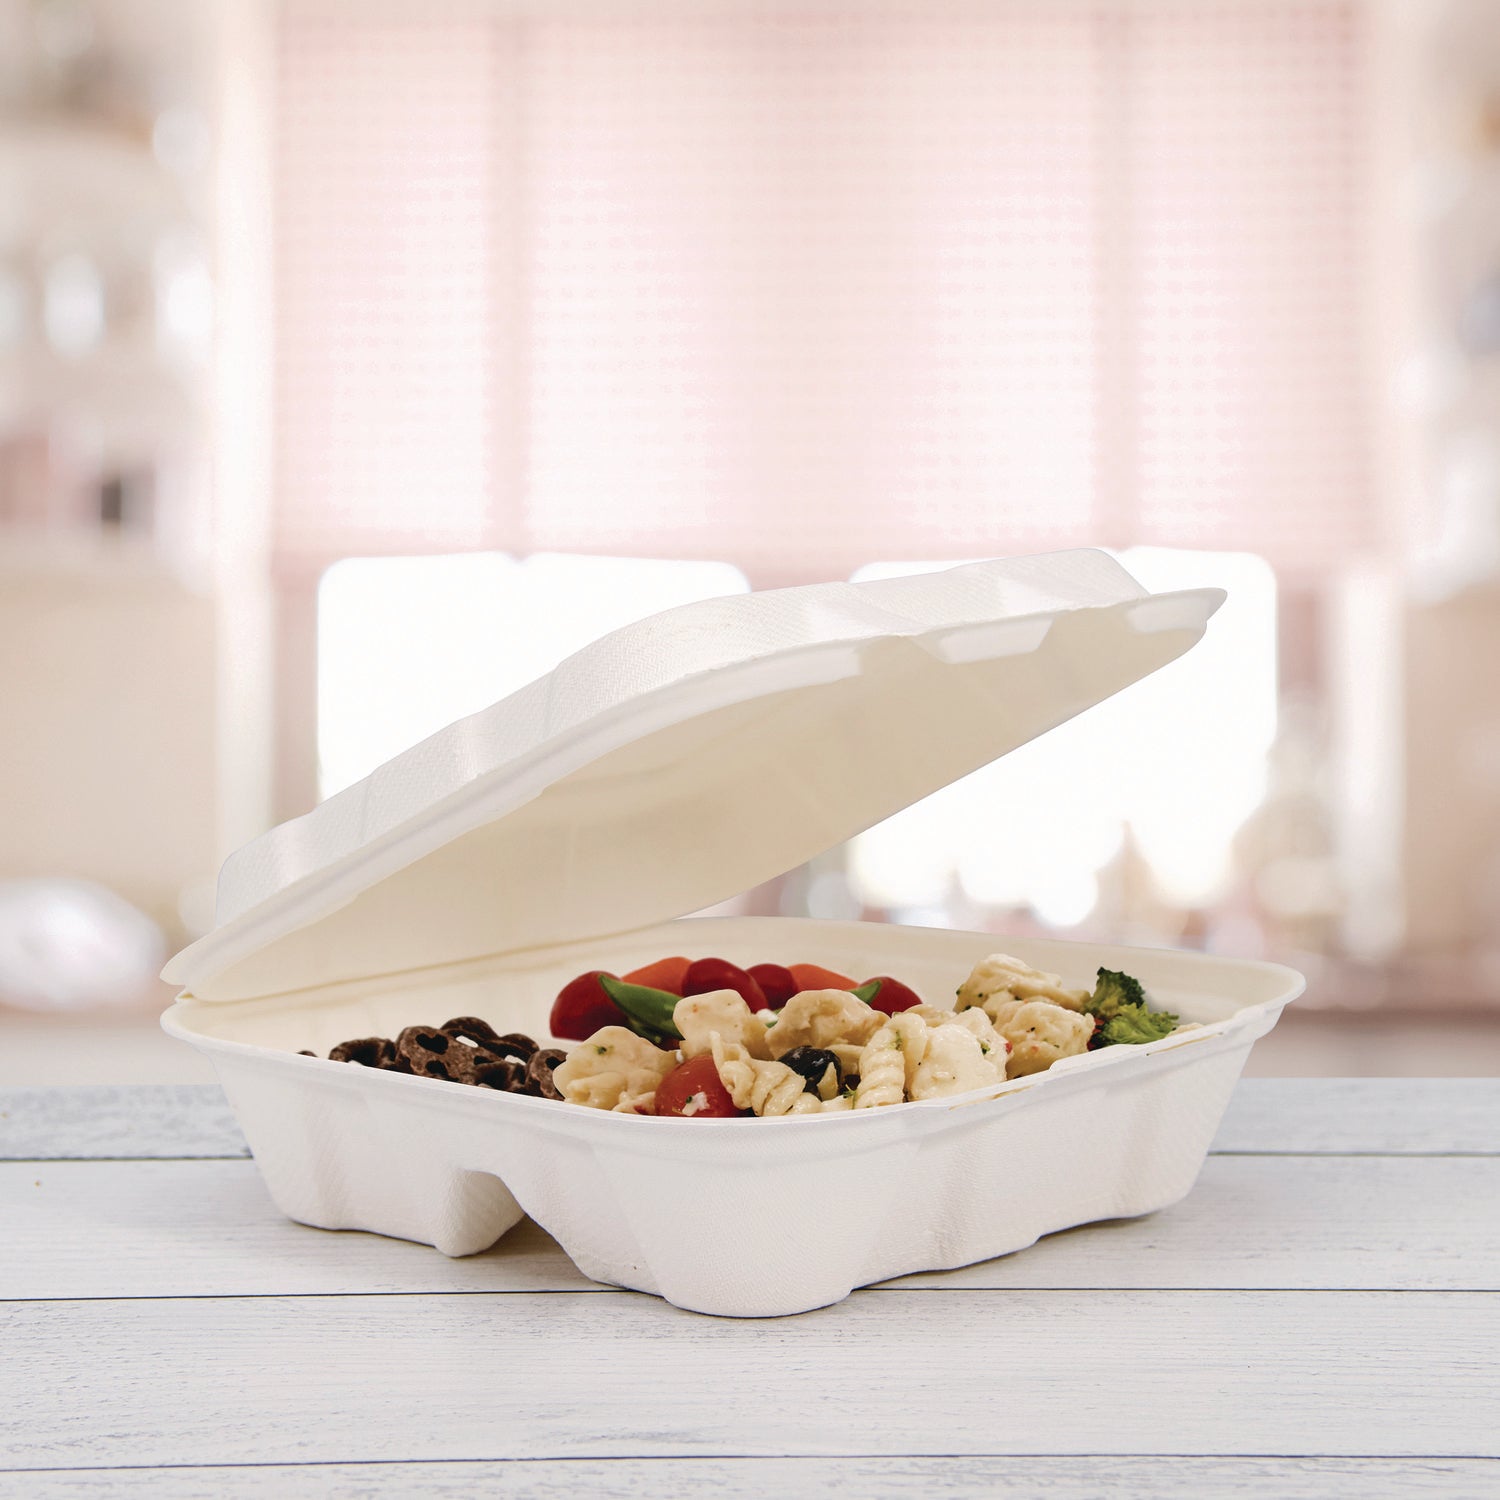 compostable-fiber-hinged-trays-proplanet-seal-3-compartment-803-x-84-x-193-ivory-molded-fiber-200-carton_dcchc8fbr3 - 6